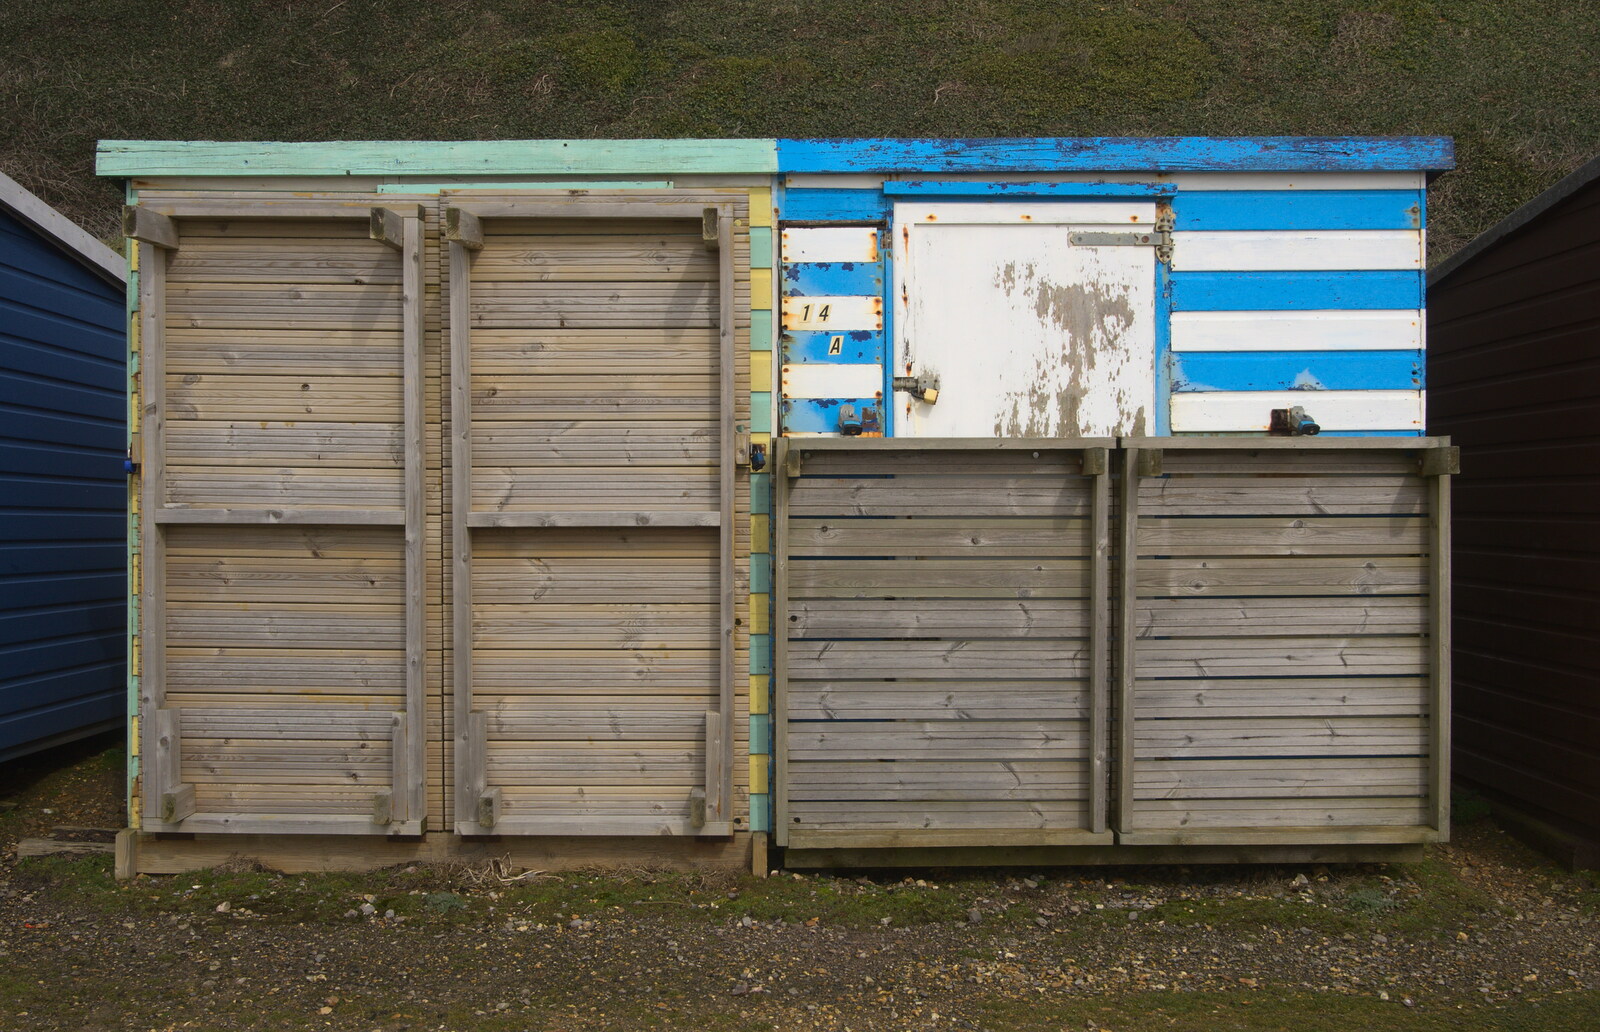 Boarded-up stripey beach hut from Barton on Sea Beach, and a Trip to Christchurch, Hampshire and Dorset - 19th March 2013